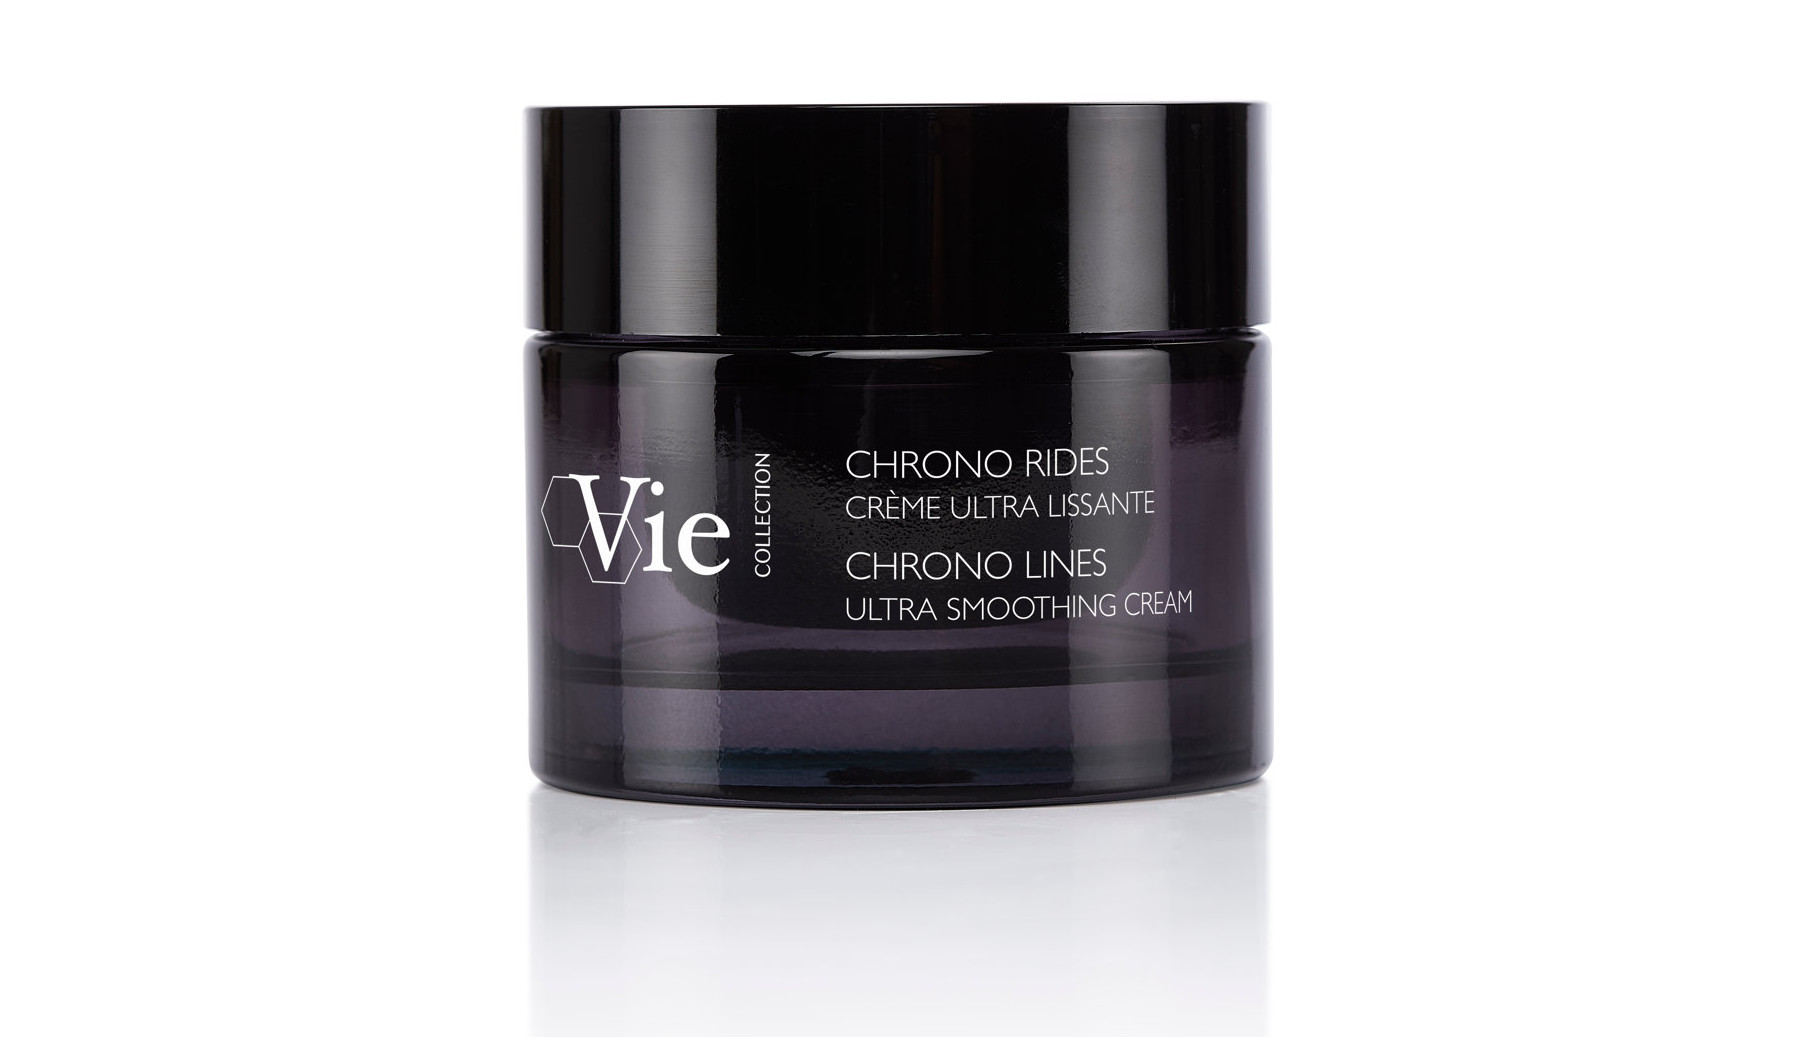 CHRONO LINES Ultra Smoothing Cream - VIE Collection